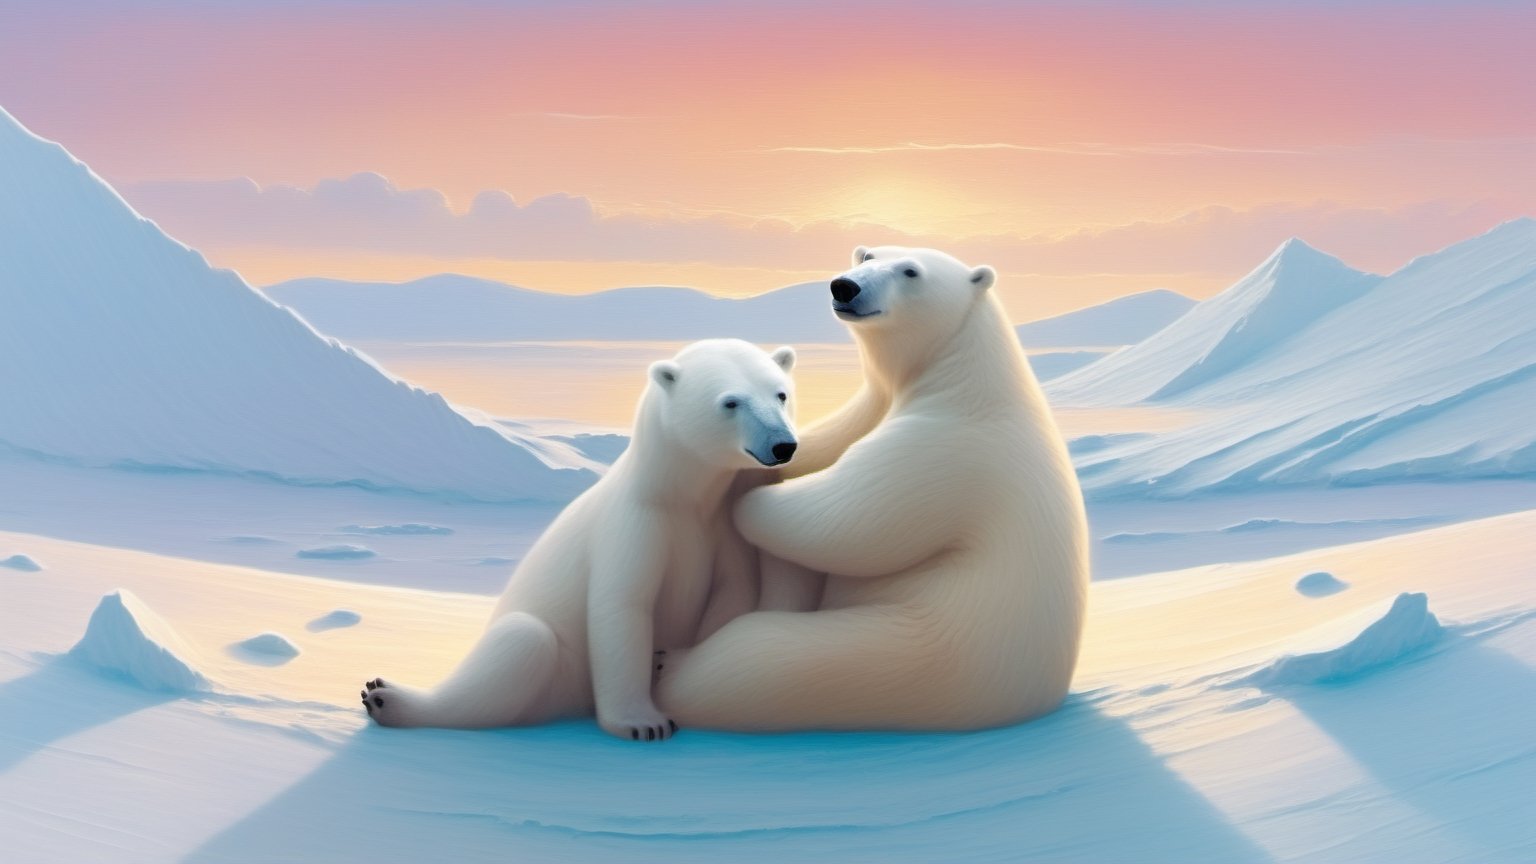 Christmas on the Arctic snowfield,happy polar bears cuddling, cute critters, by oliver jeffers